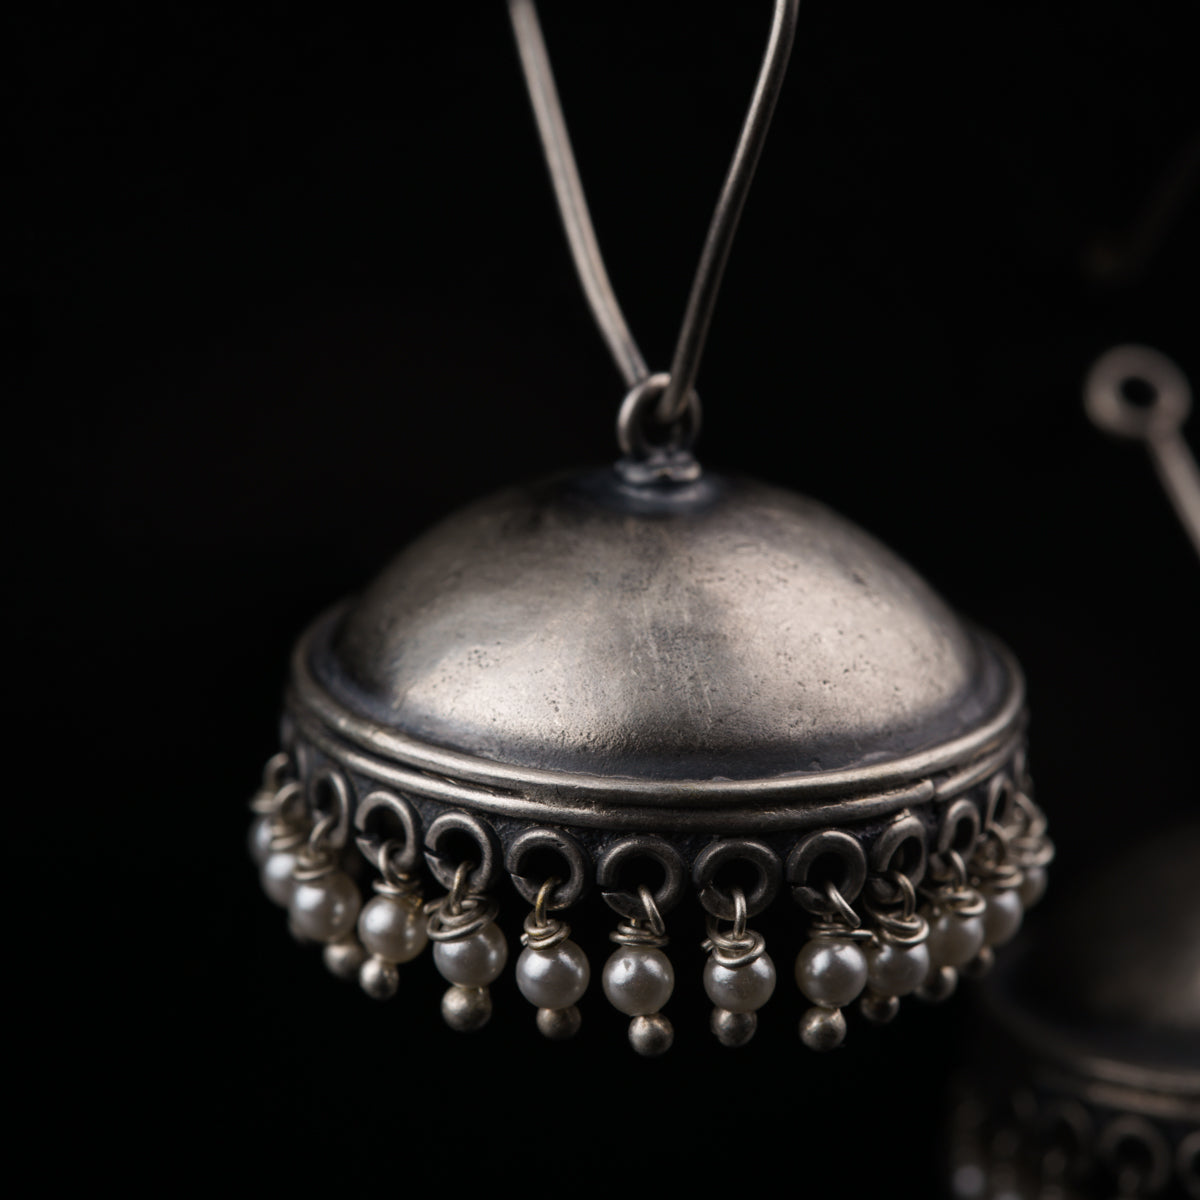 a silver bell with pearls hanging from it